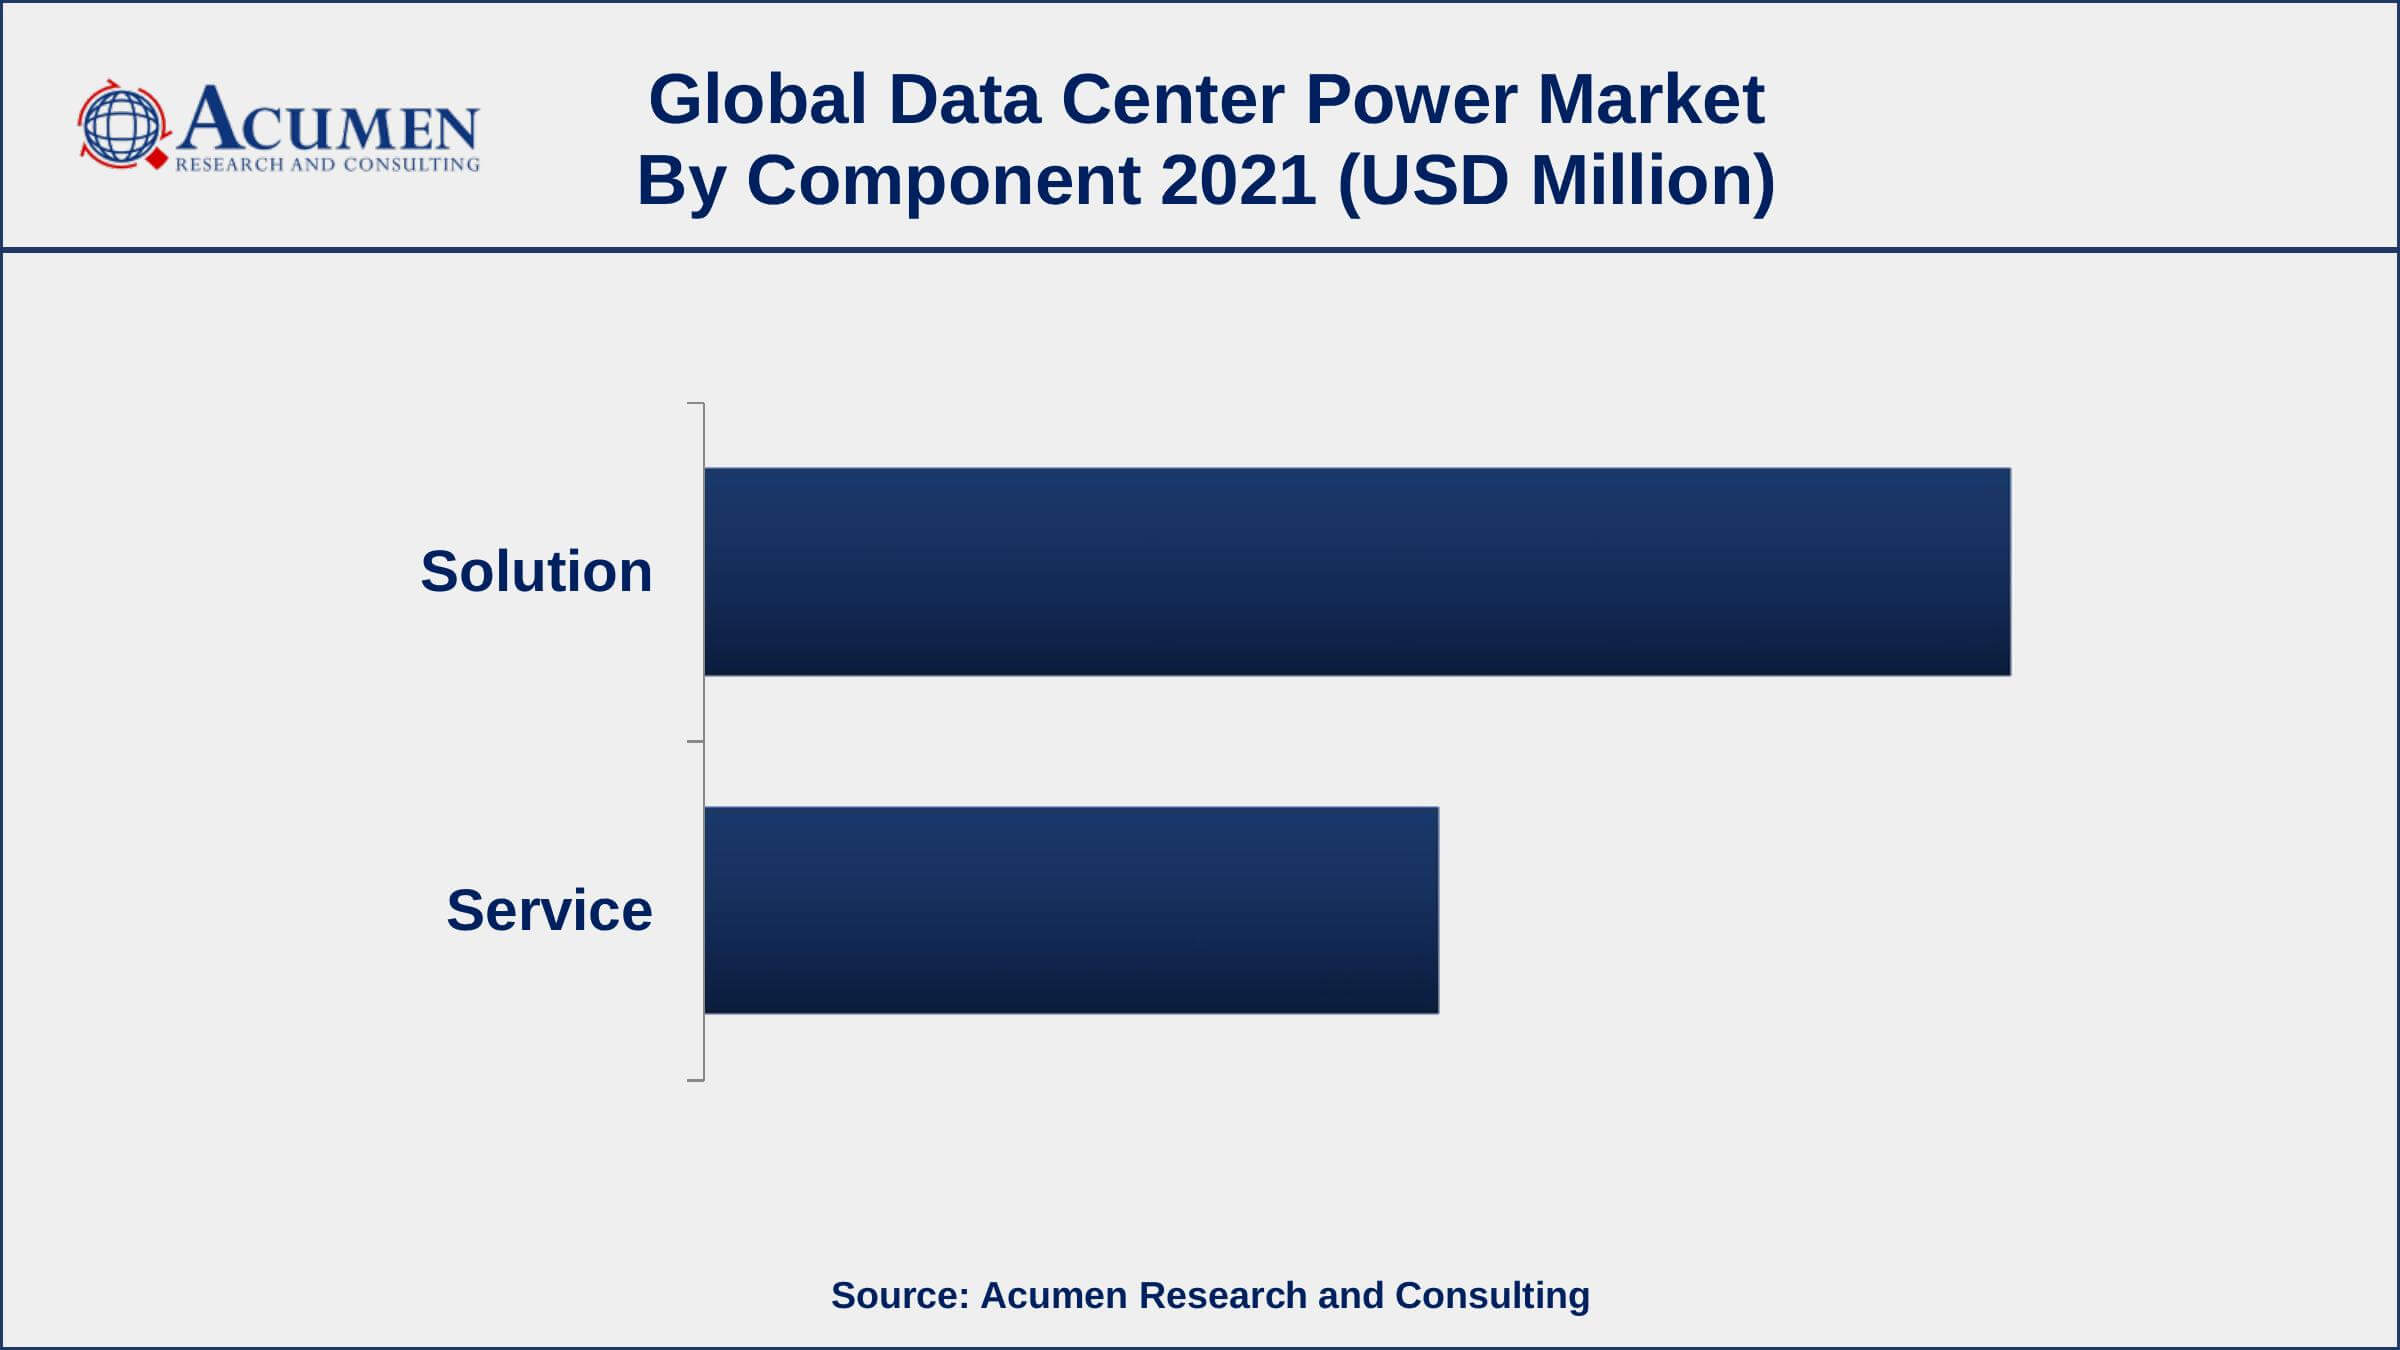 By component, the solution segment has accounted market share of over 64% in 2021